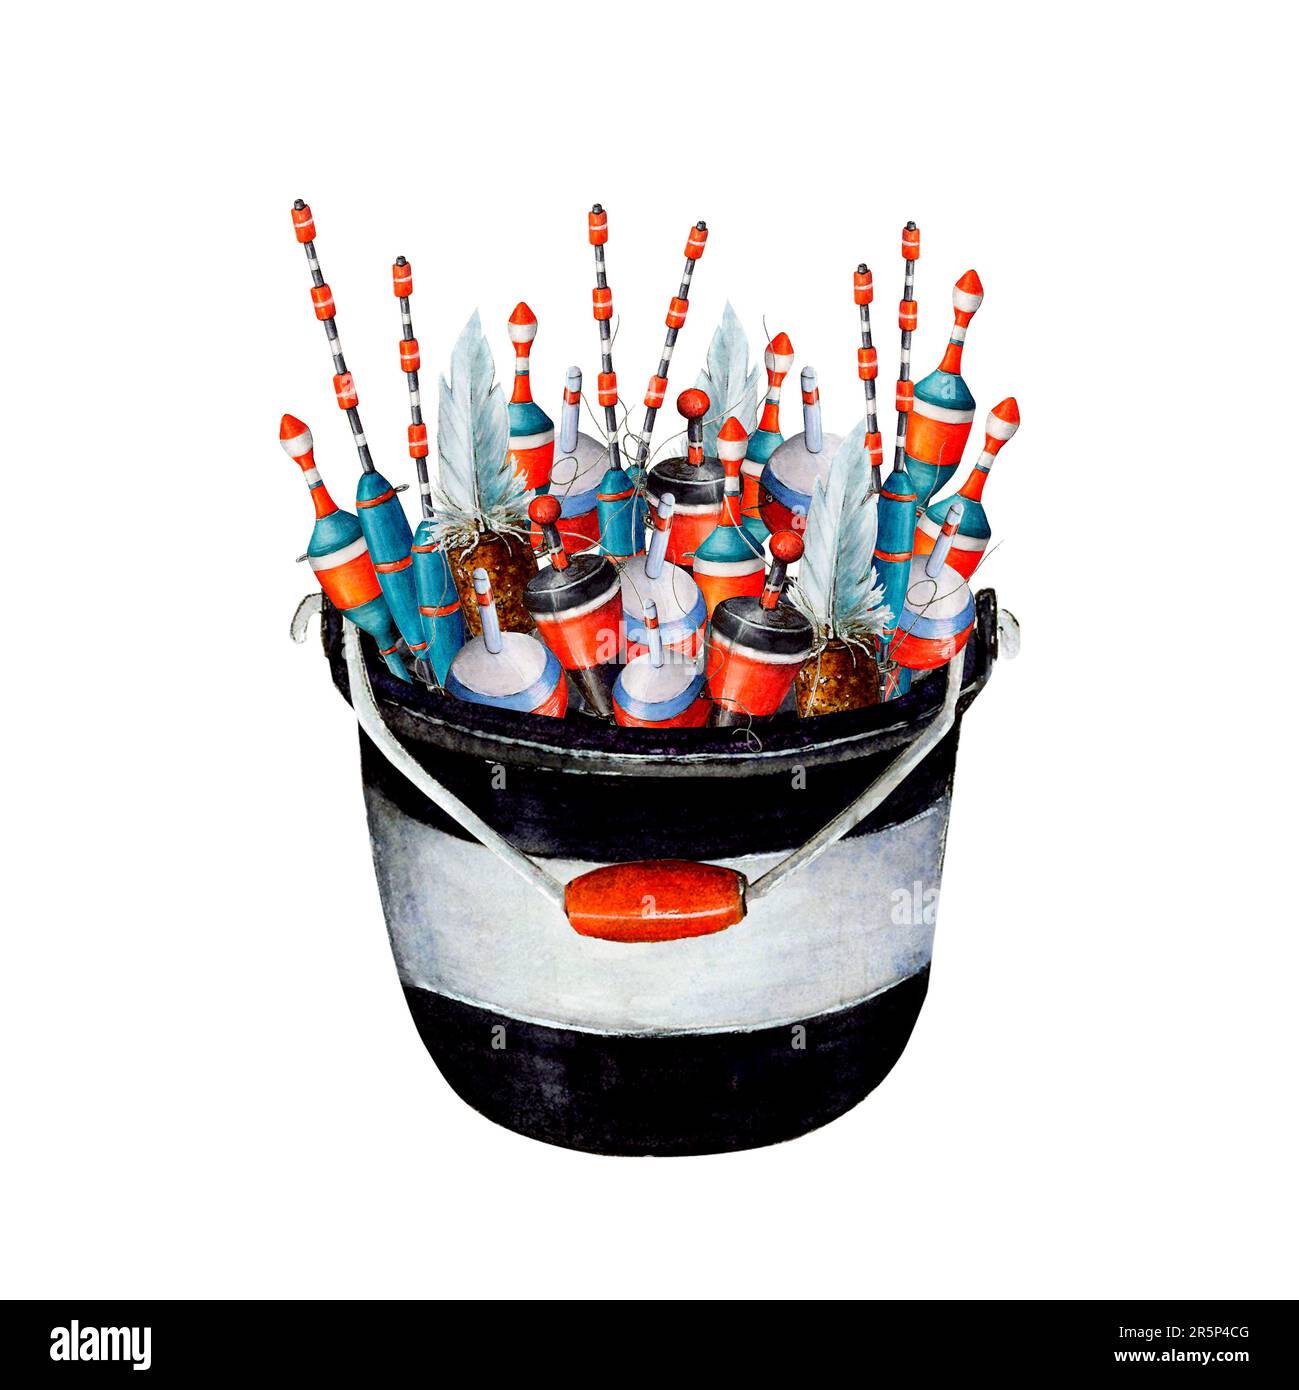 https://c8.alamy.com/comp/2R5P4CG/watercolor-drawing-fishing-bucket-black-and-white-with-red-handle-full-of-various-bobblers-angling-gear-for-wallpapers-logo-banners-icon-cards-2R5P4CG.jpg